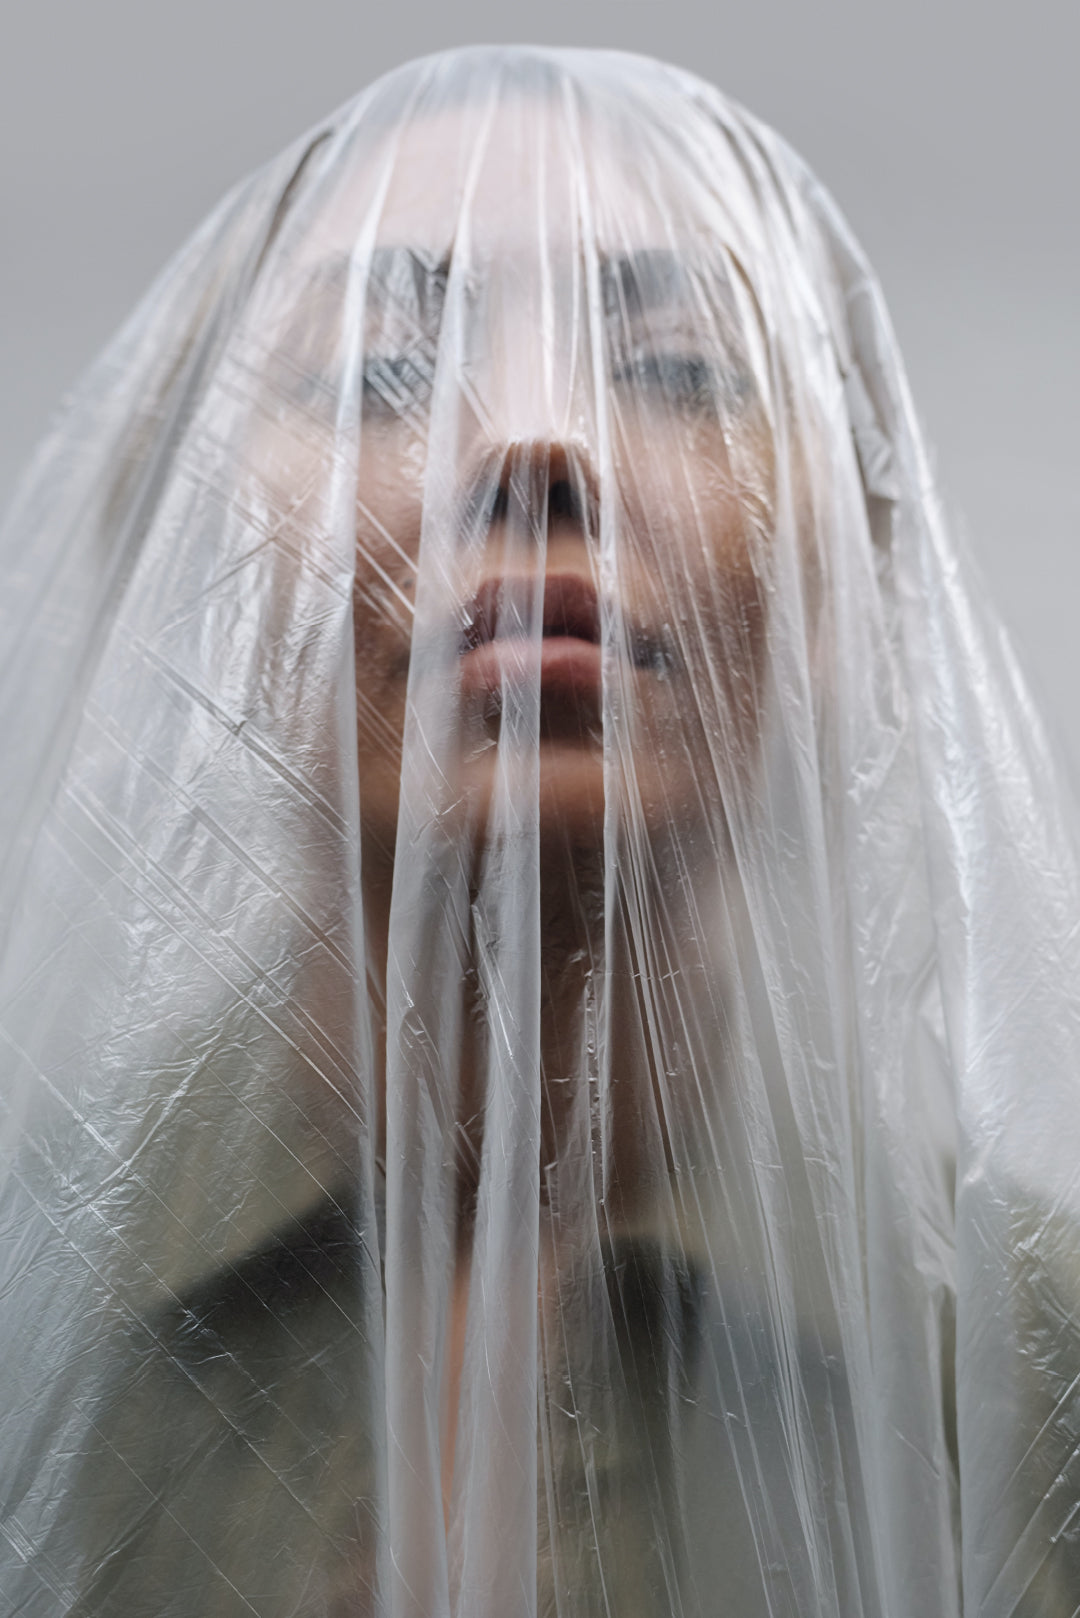 Woman with plastic packaging over her head - An image to symbolise the ever-growing reliance on plastic packaging in the modern world.